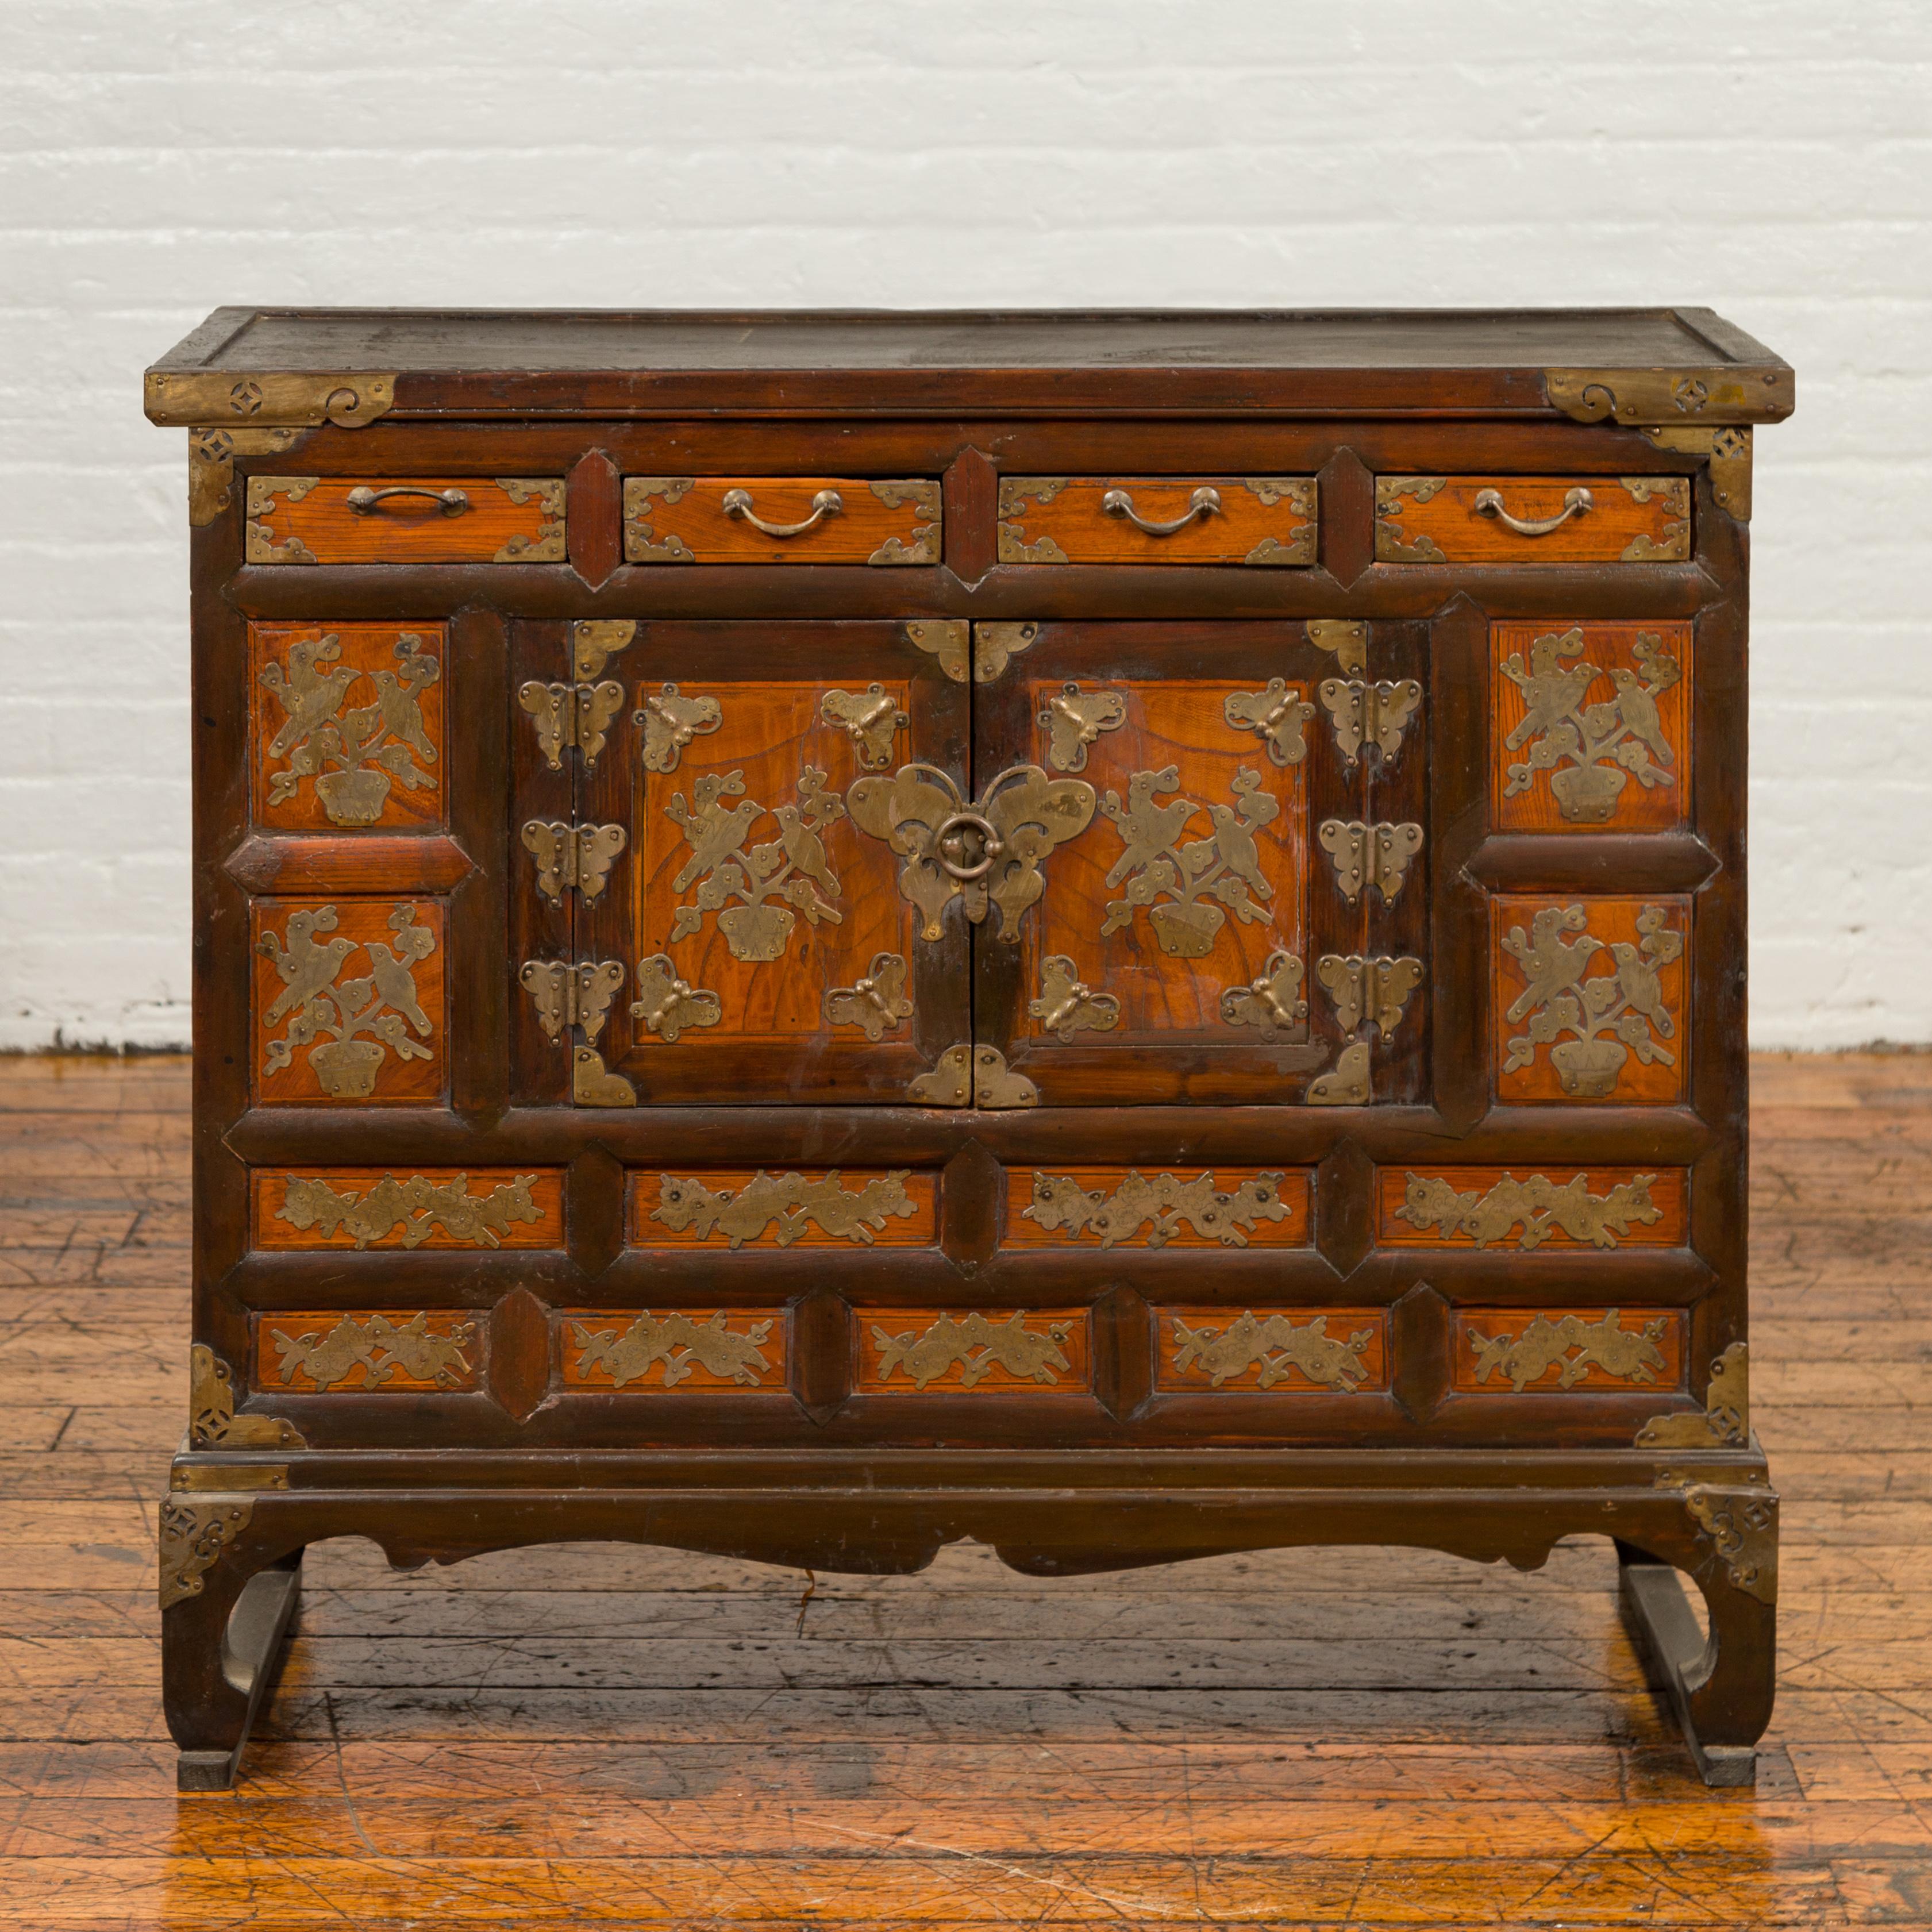 An antique Korean side chest from the 19th century, with four drawers, double doors and brass butterfly hardware. Born in Korea during the 19th century, this side chest features a rectangular top with slightly recessed central panel, sitting above a